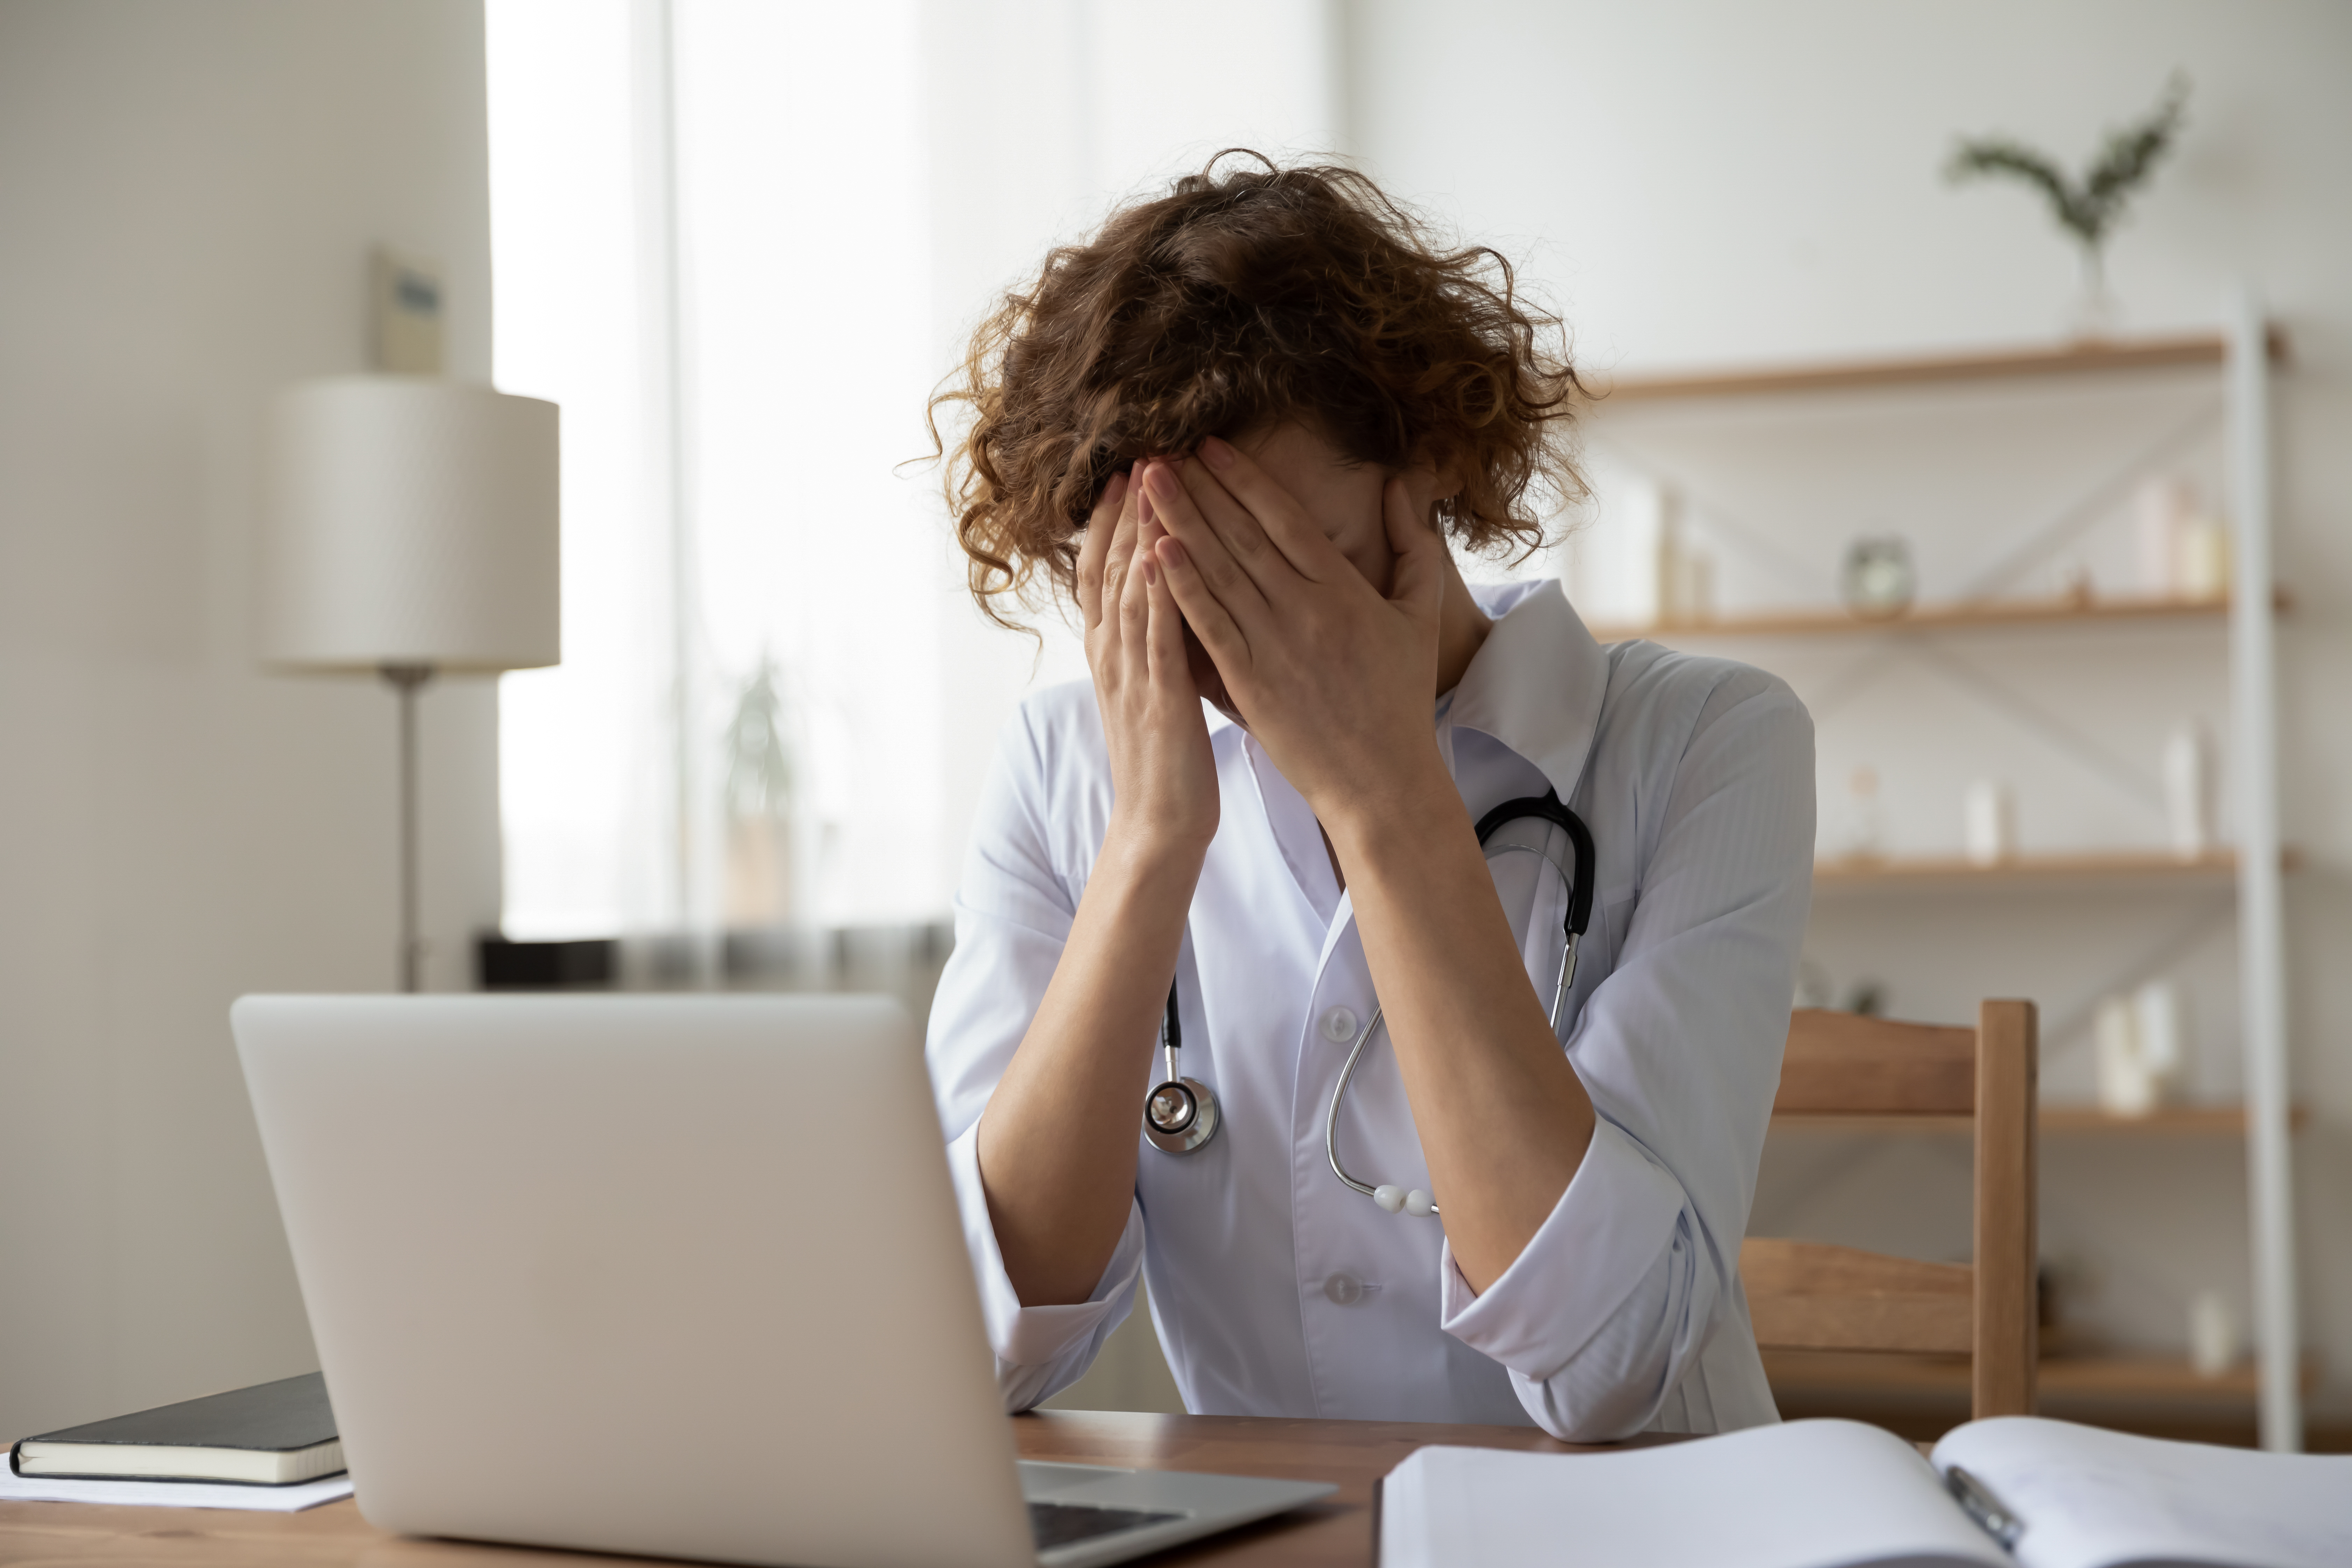 A devastated nurse sitting with her hand over her face while seated in front of a laptop | Source: Shutterstock